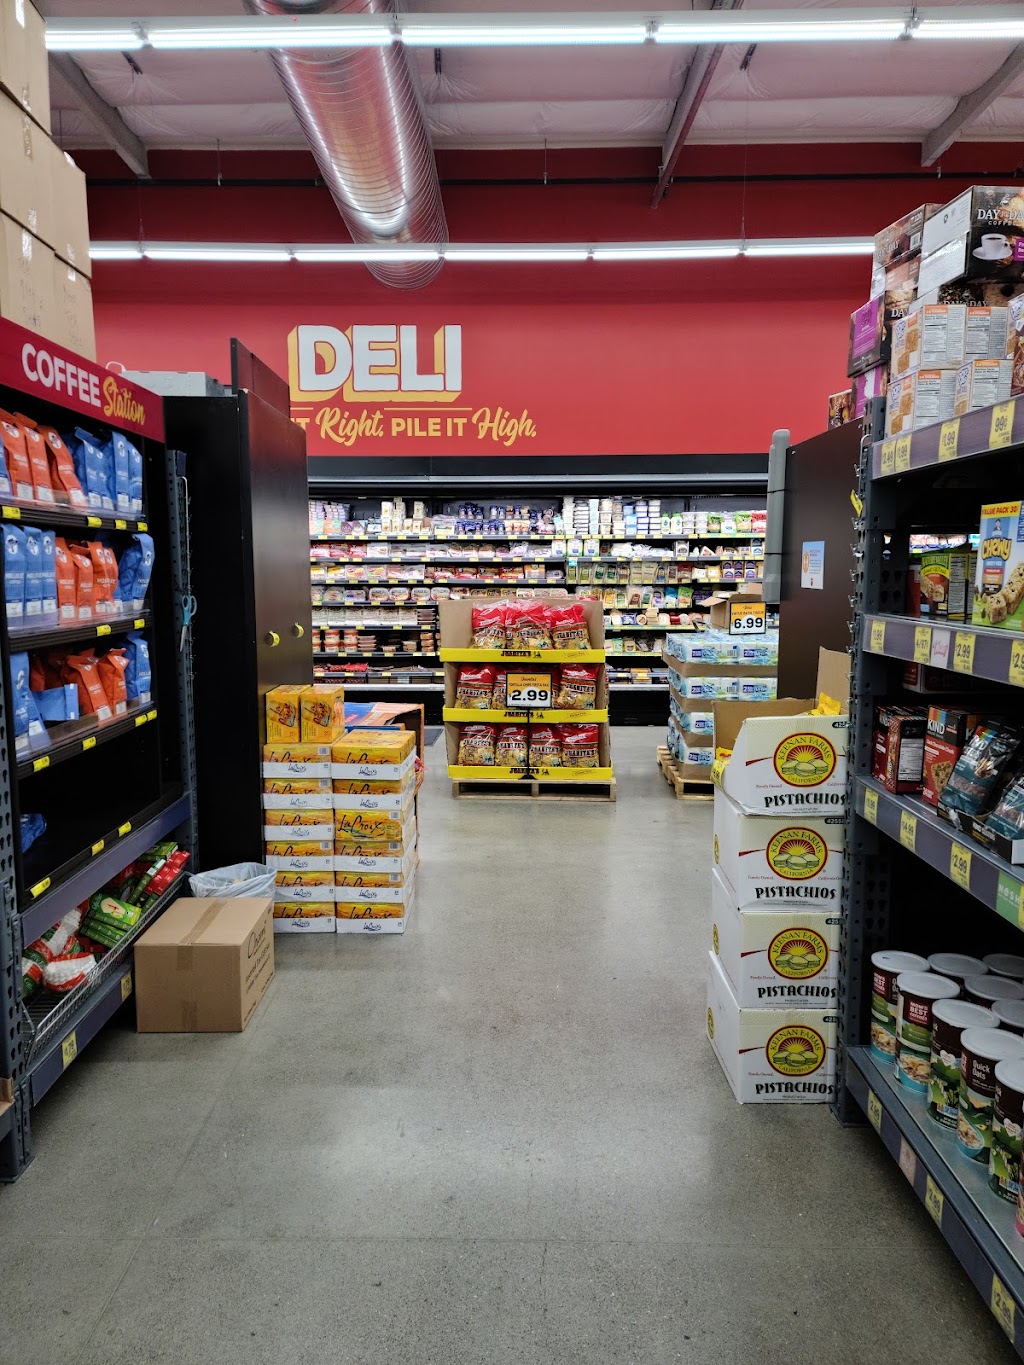 Grocery Outlet | 355 Bayshore Blvd, San Francisco, CA 94124 | Phone: (415) 276-2797